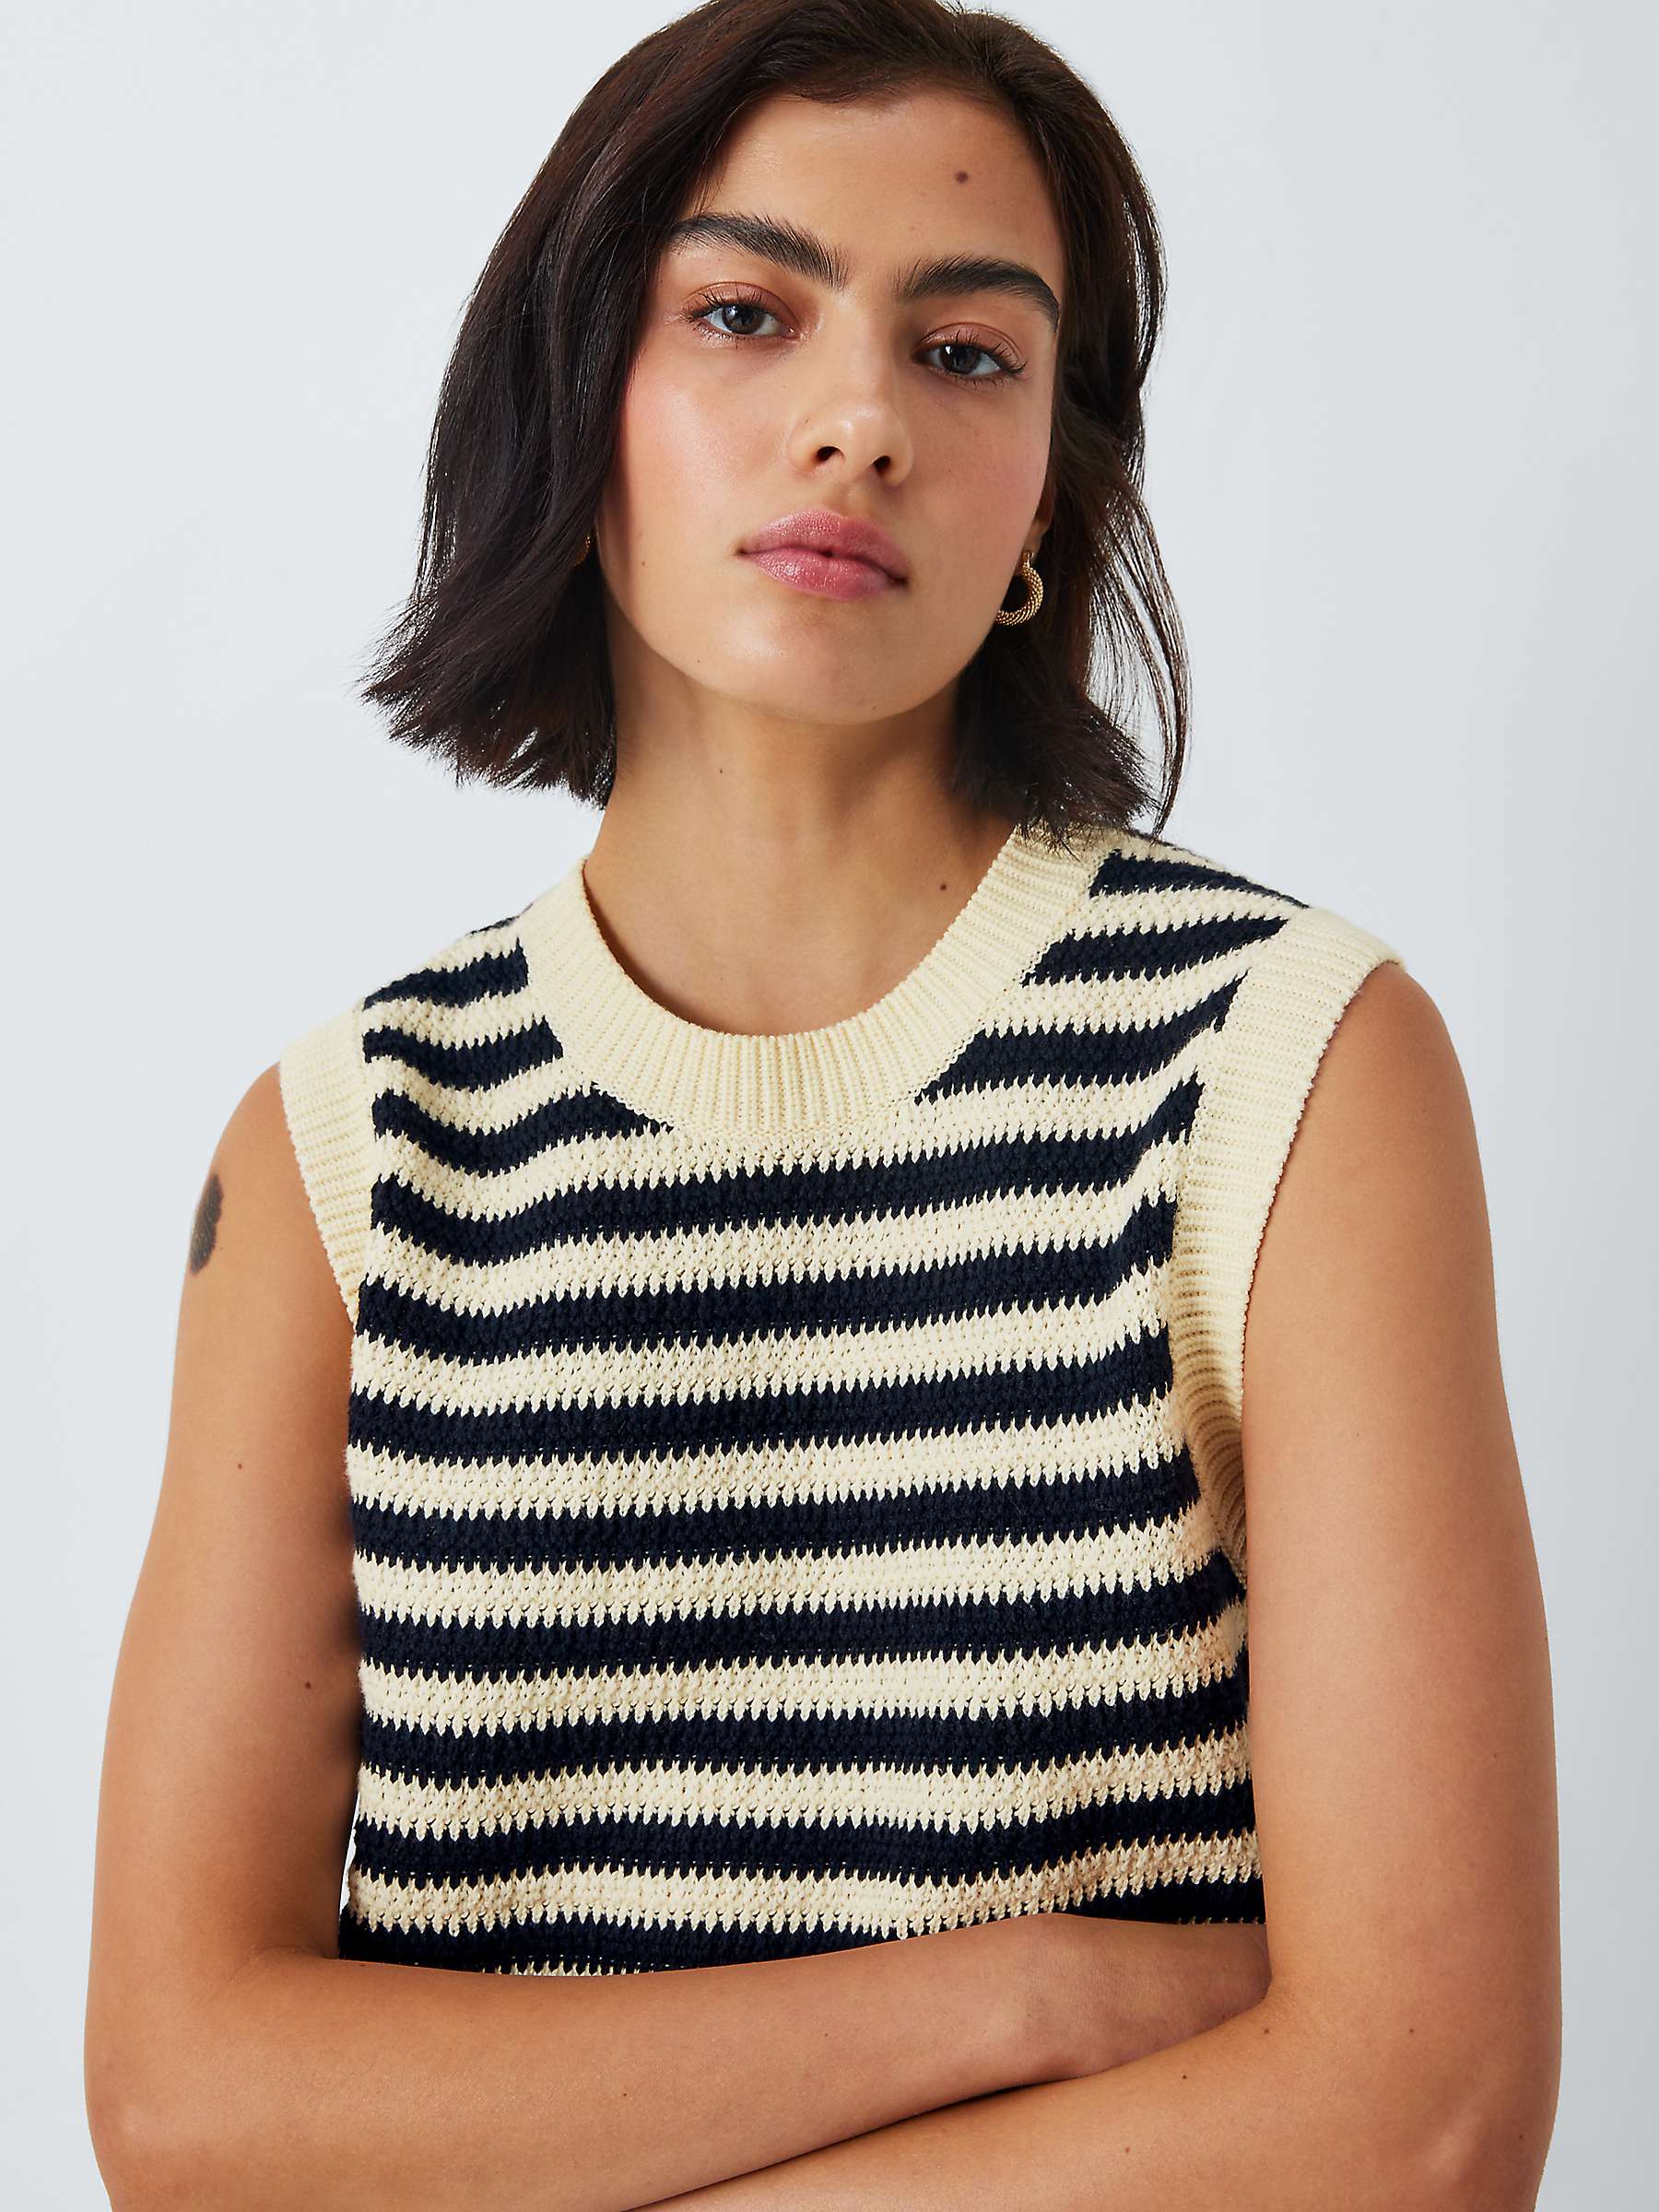 Buy Barbour Tomorrow's Archive Piper Striped Knitted Tank Top, Navy/White Online at johnlewis.com